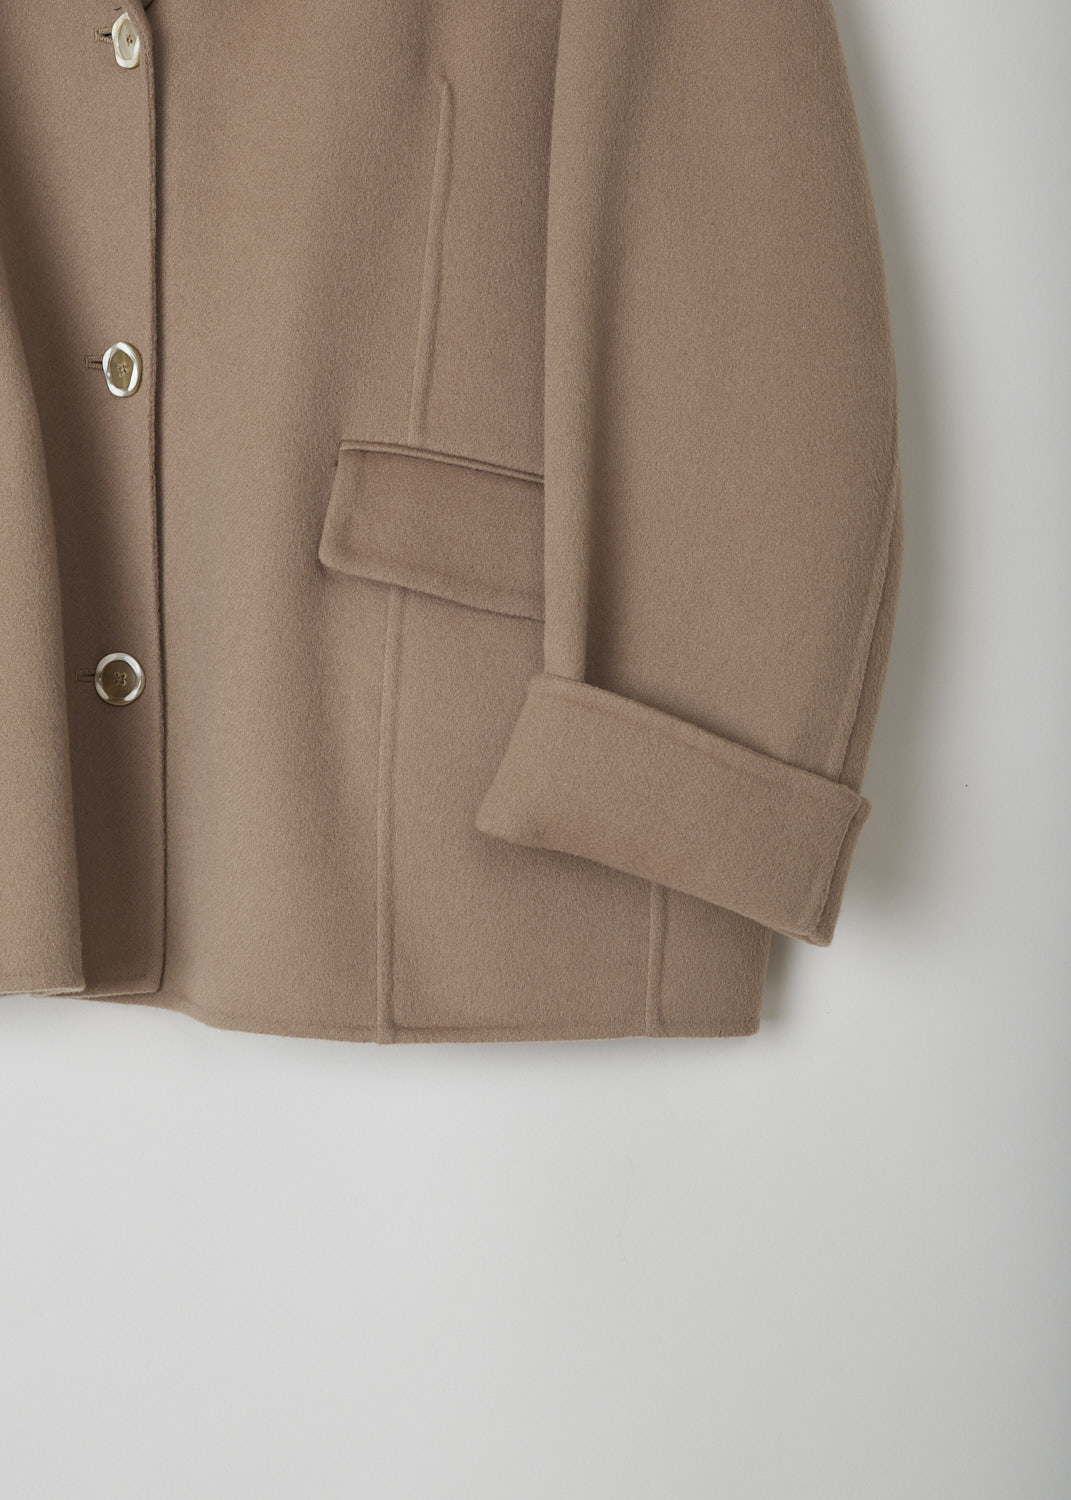 MARNI, CAMEL COLORED WOOL-BLEND COAT, GIMA0161KO_TW840_00M02, Brown, Detail, This short camel-colored coat has an wider silhouette. The coat has a notched lapel and a front button closure. On the front, the coat has two welt pockets with flap. The long sleeves have rolled cuffs. The coat has a vertical centre seam across the back. 
